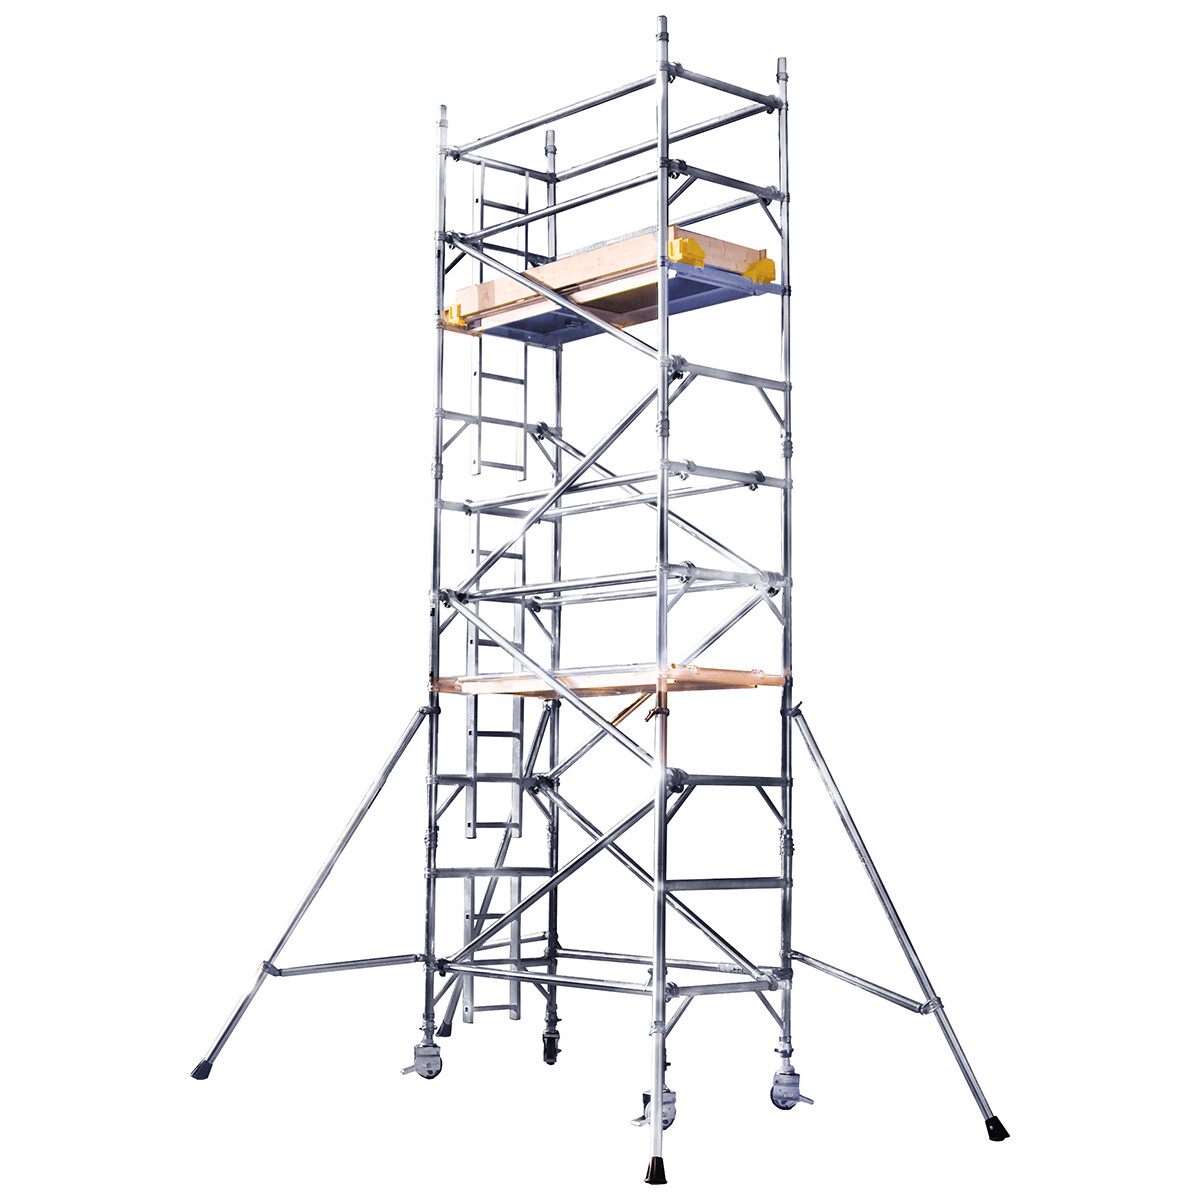 Narrow Span Mobile Tower - 0.85m wide x 4.3m high